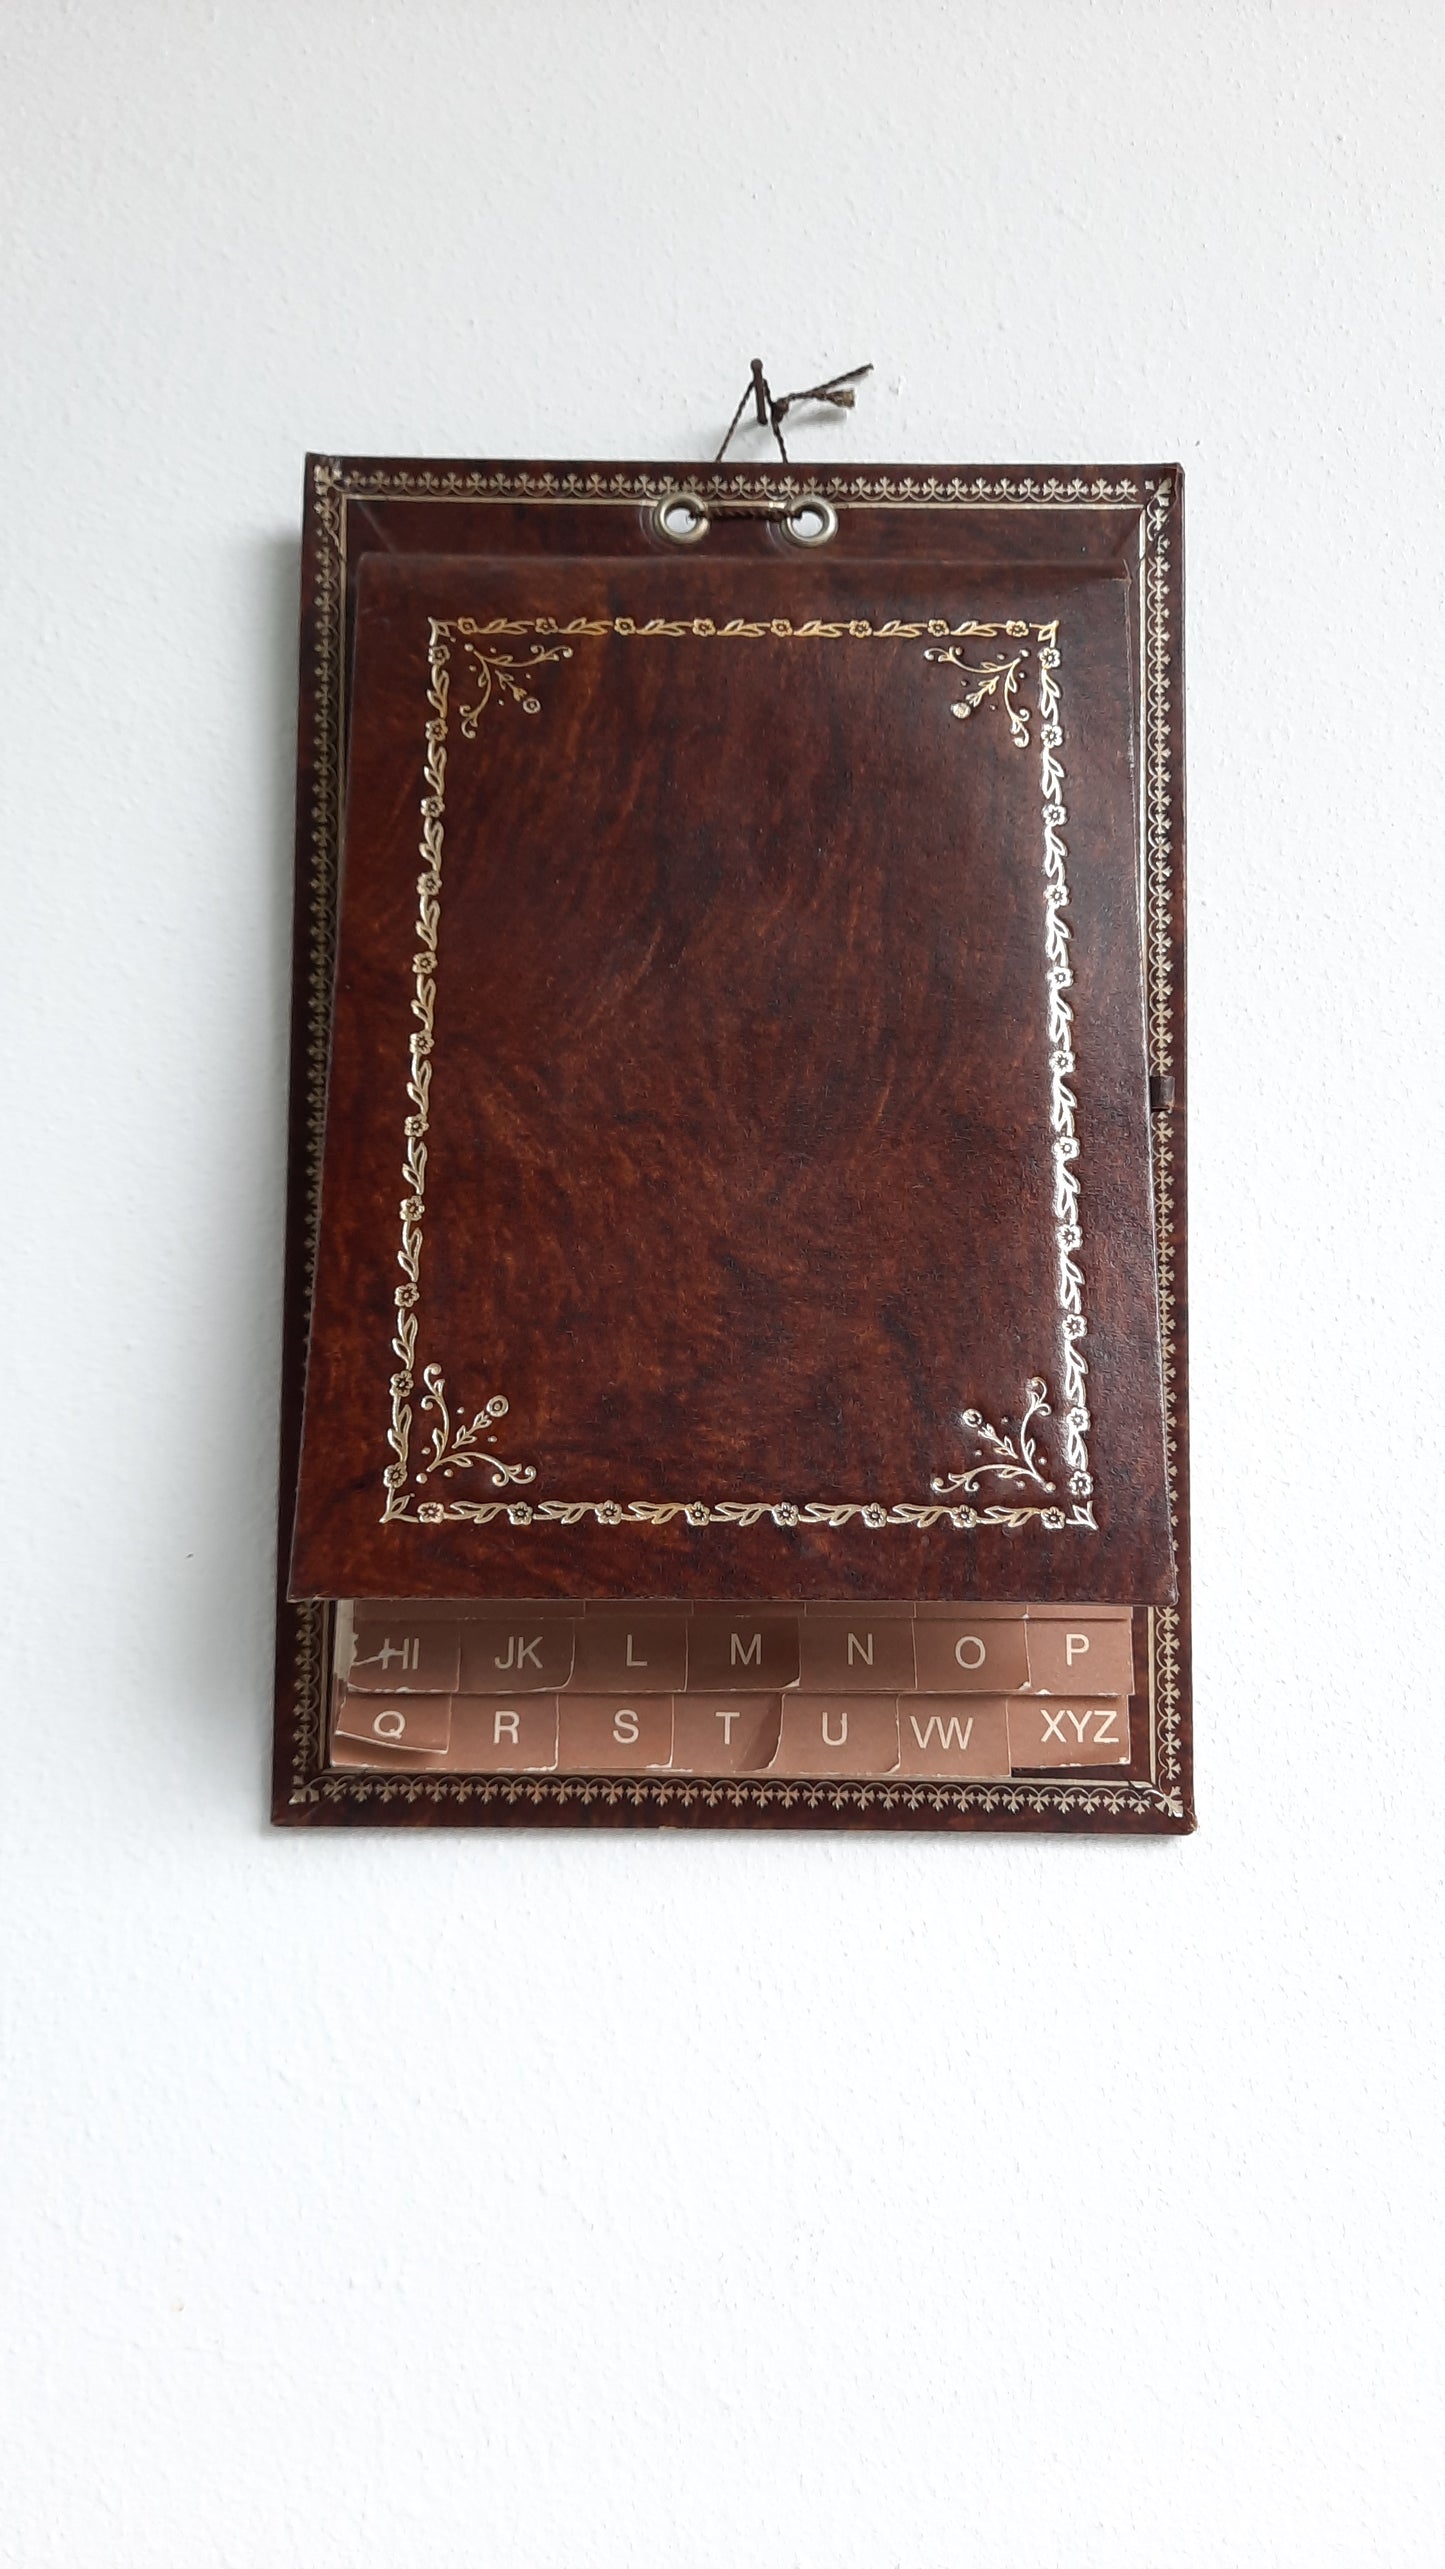 Vintage Wall Hanging Alphabetical Contact Book